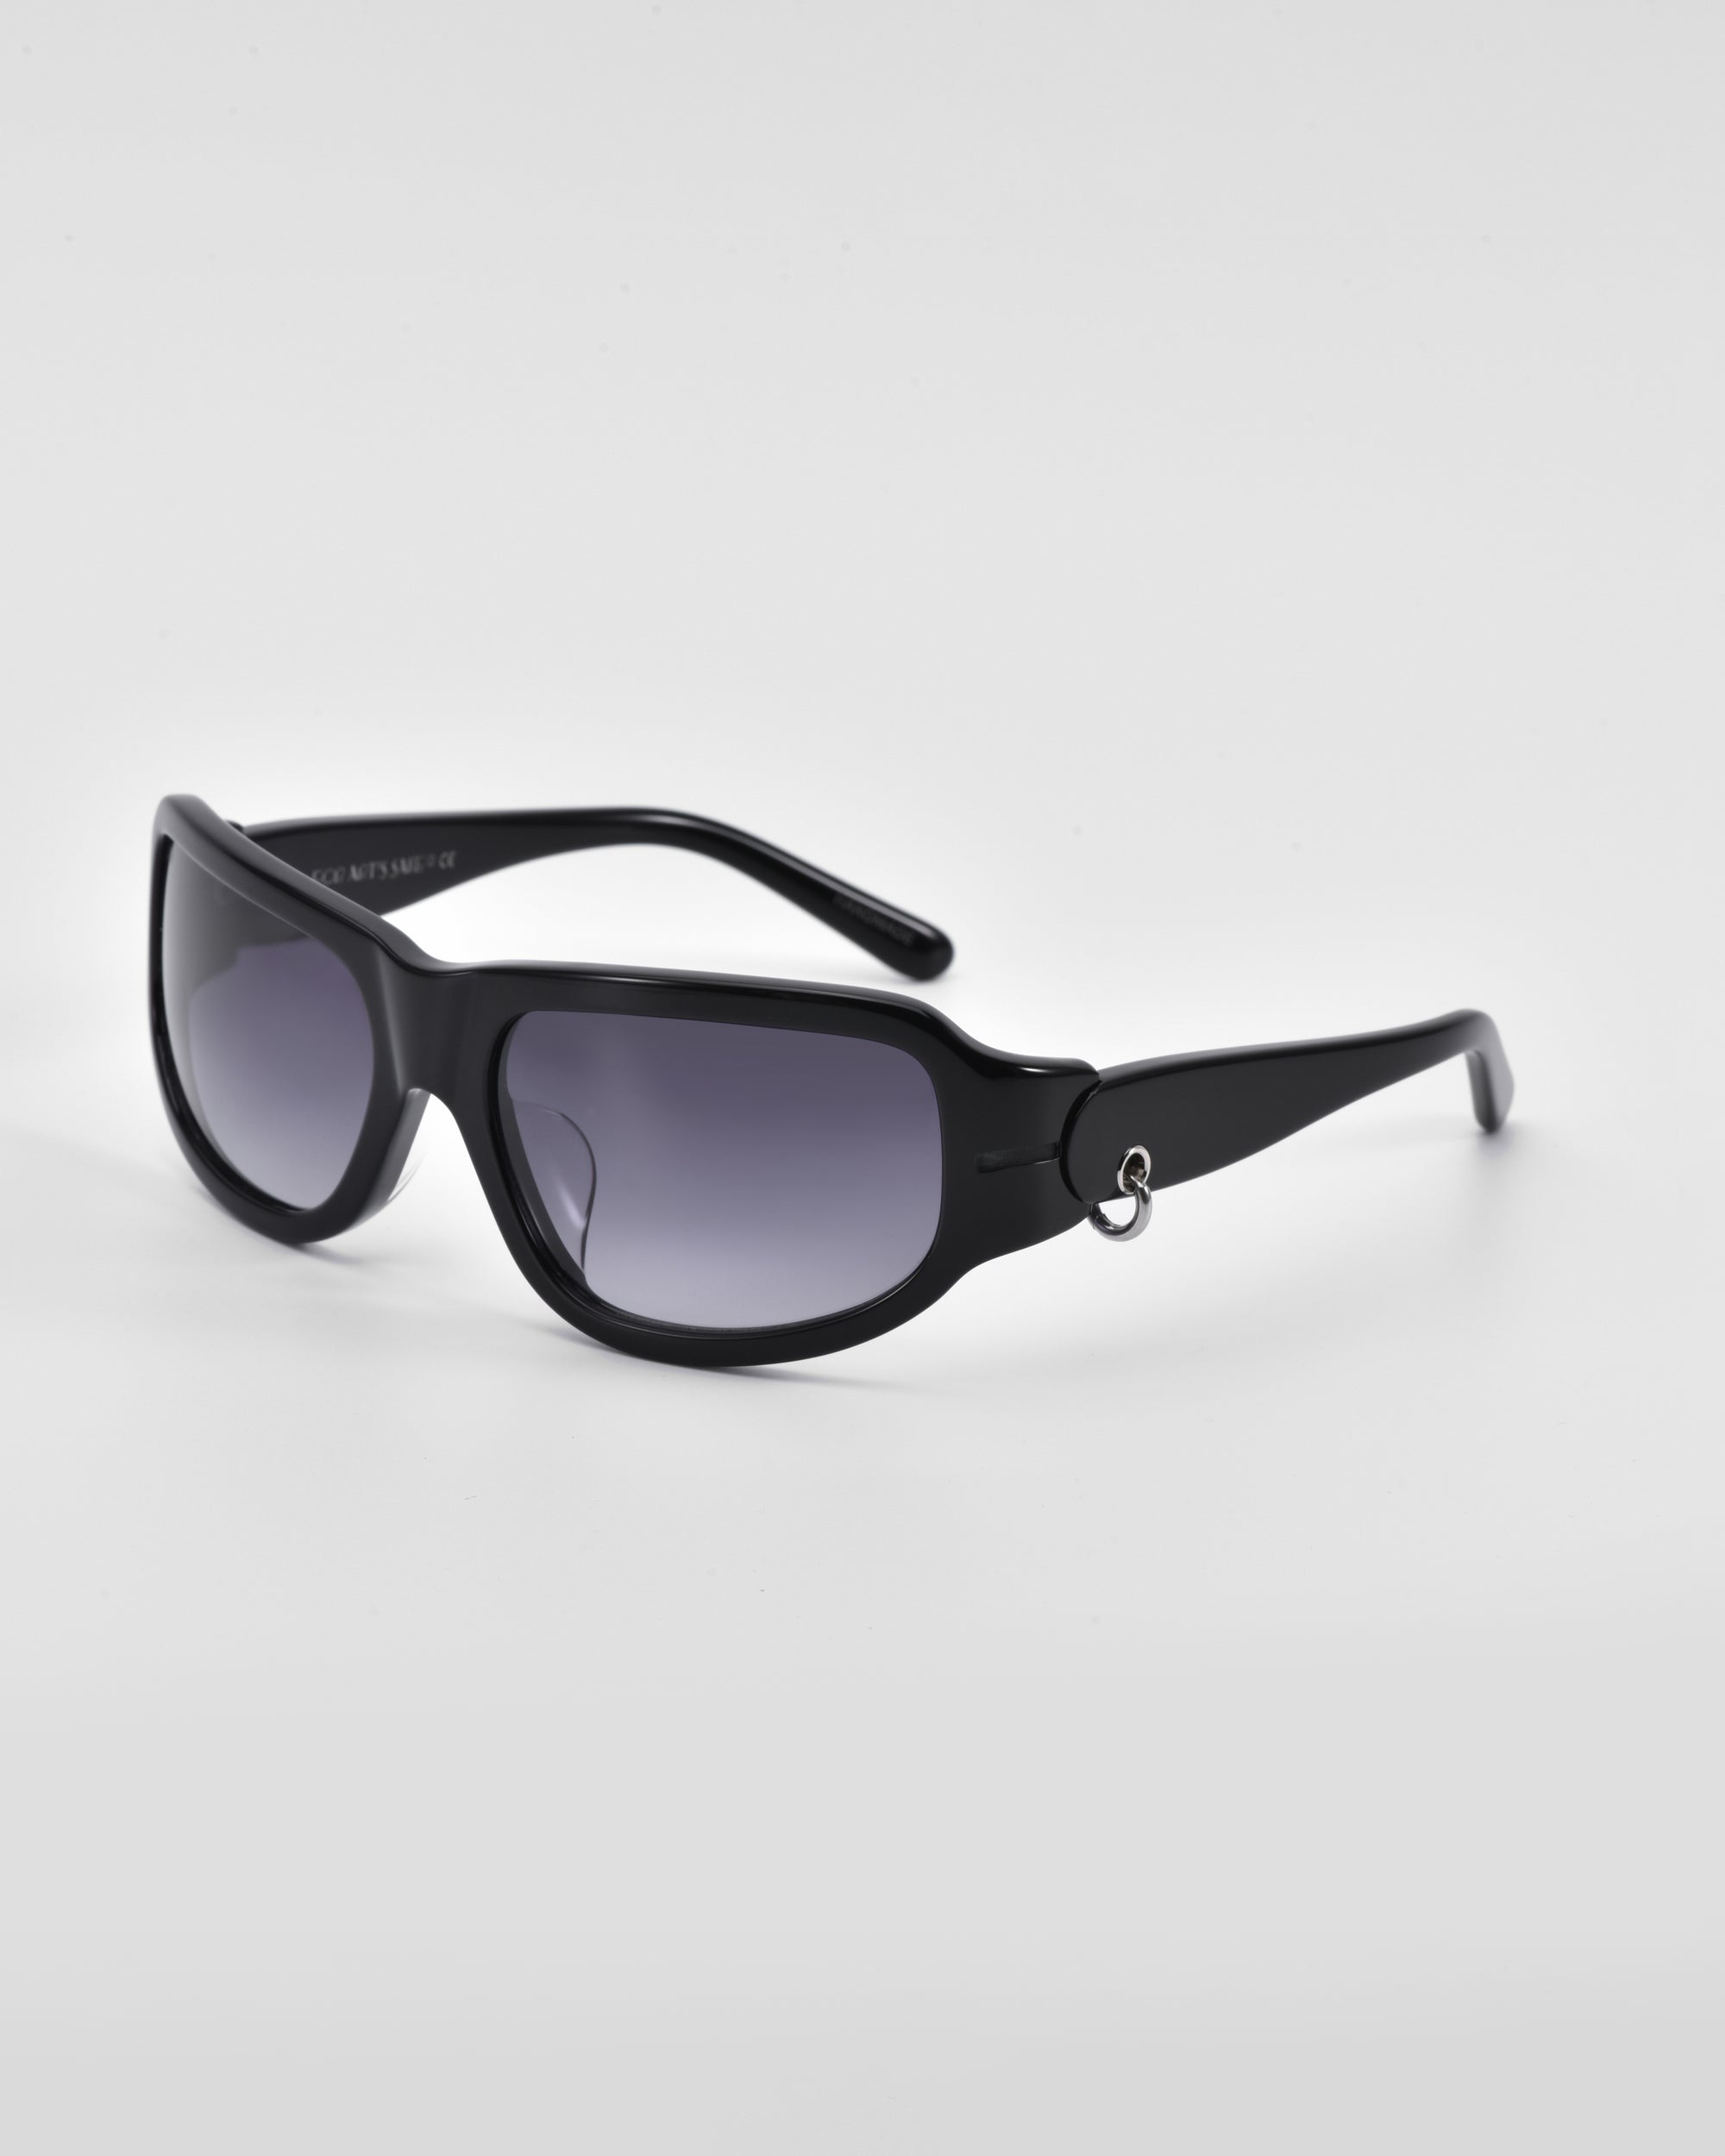 A pair of sleek For Art's Sake® Raven sunglasses with dark tinted lenses set against a plain white background. The sunglasses feature a simple, modern design with slightly curved arms and a small metallic 18-karat gold detail near the hinges.